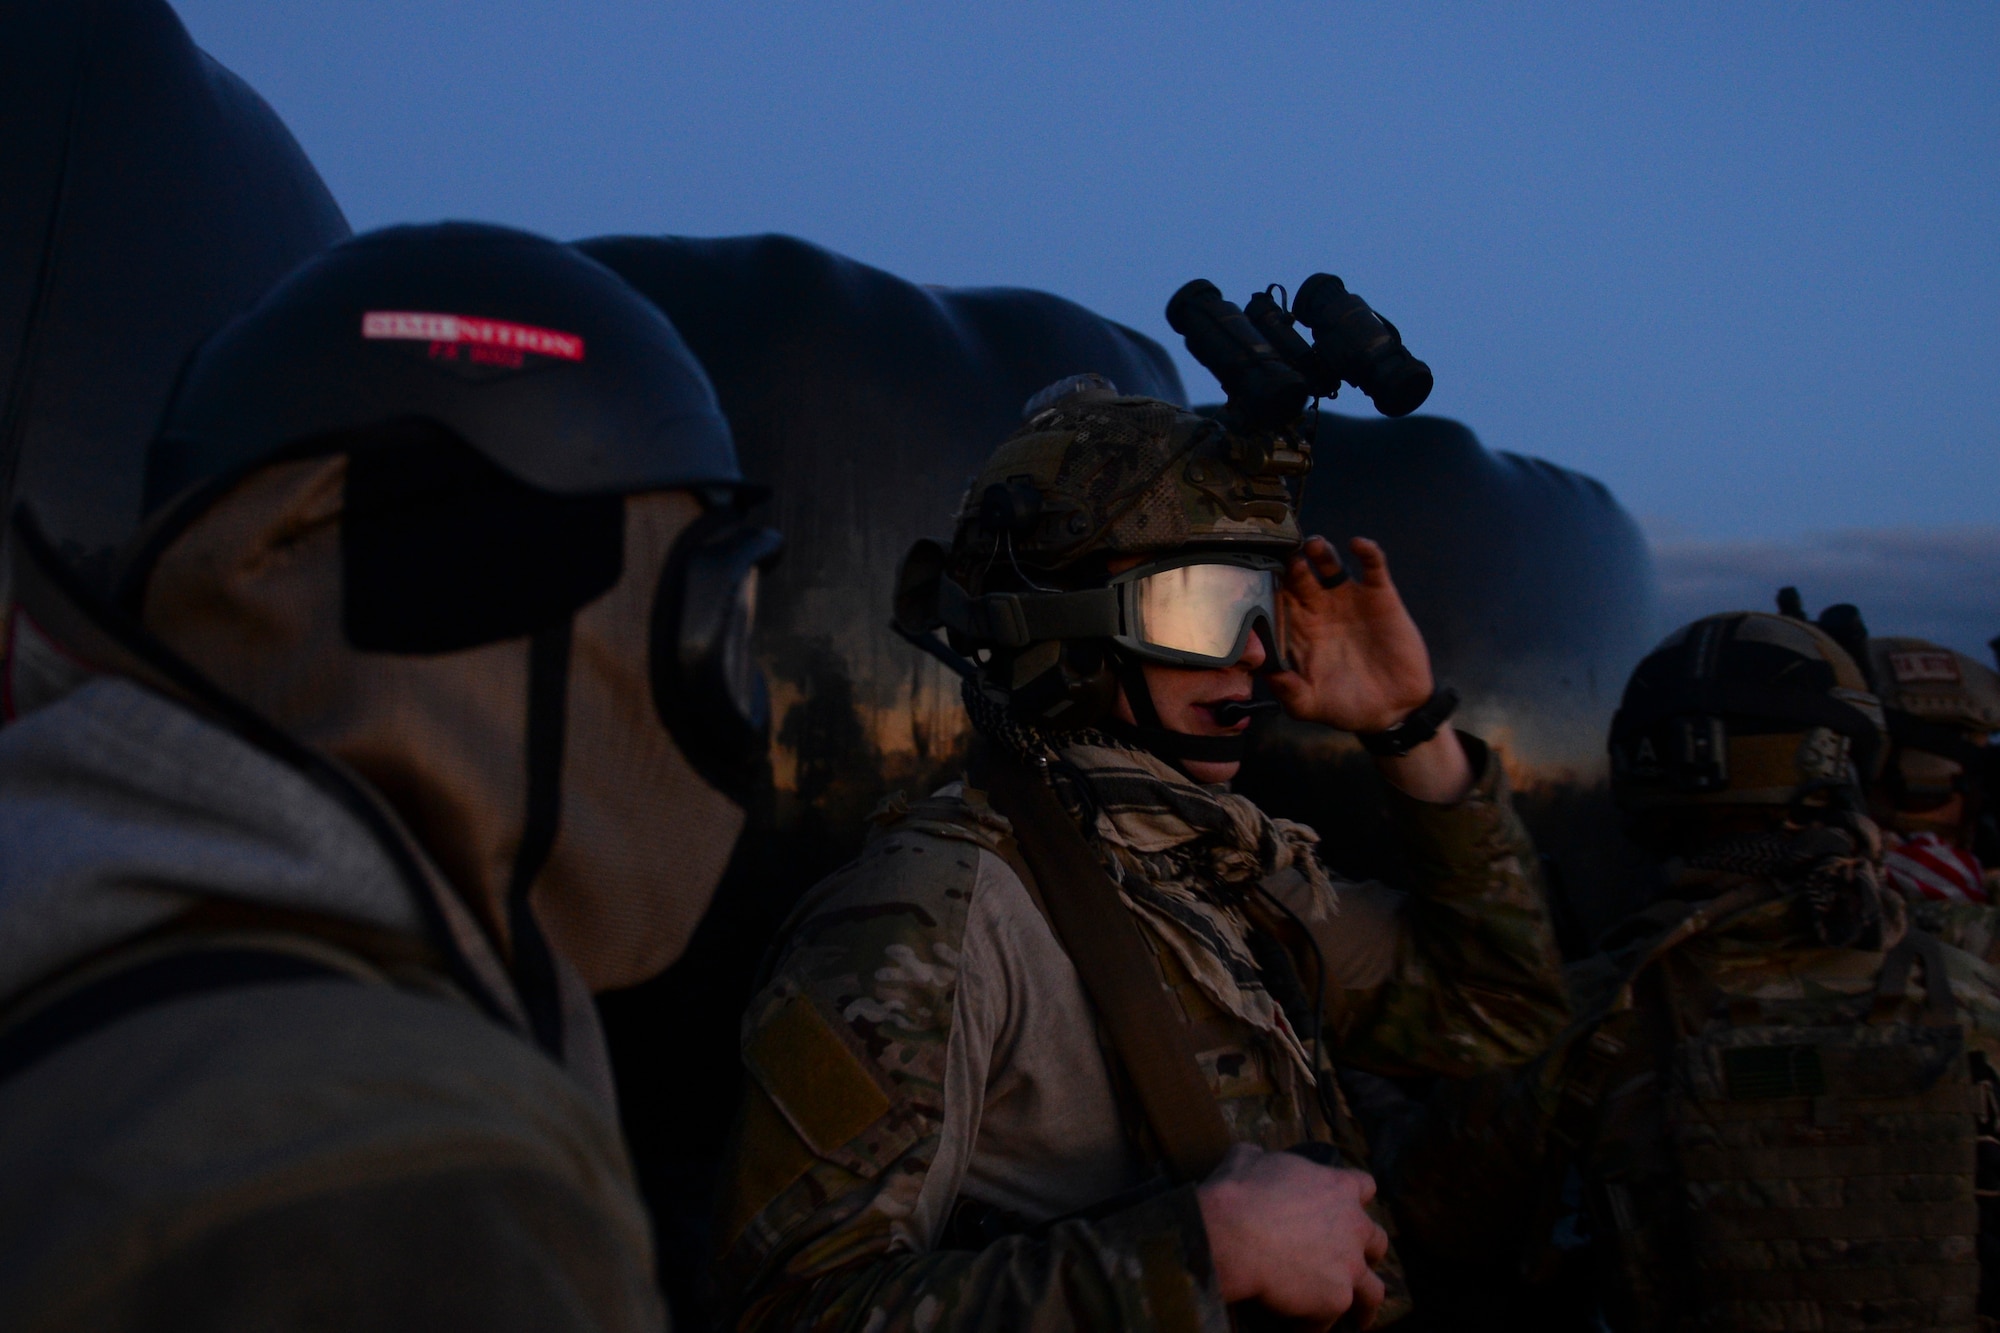 U.S. Air Force Air Commandos from the 352nd Special Operations Wing fast rope from a CV-22B Osprey currently assigned to the 7th Special Operations Squadron Feb. 11, 2016, during a routine training mission at RAF Sculthorpe in Norwich, England. The CV-22 Osprey is a tiltrotor aircraft that combines the vertical takeoff, hover and vertical landing qualities of a helicopter with the long-range, fuel efficiency and speed characteristics of a turboprop aircraft. Its mission is to conduct long-range infiltration, exfiltration and resupply missions for special operations forces. (U.S. Air Force photo by Staff Sgt. Micaiah Anthony/Released)